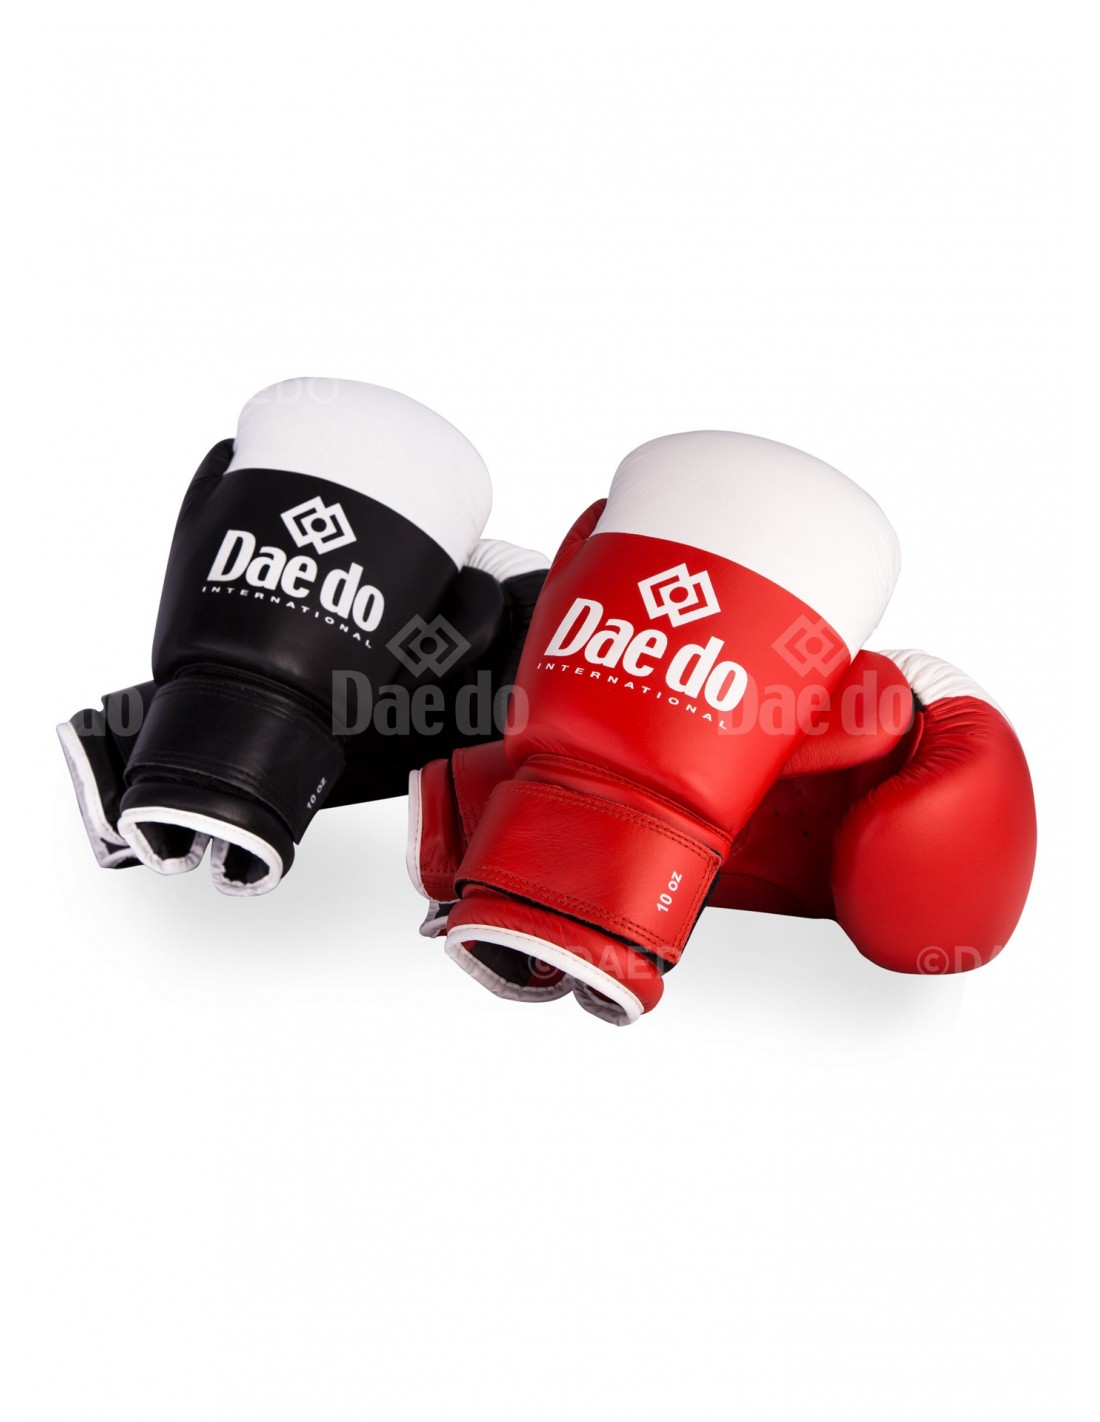 A women's boxing guide: 8 oz, 10 oz, 12 oz, 14 oz or 16 oz – selecting the  right glove for you